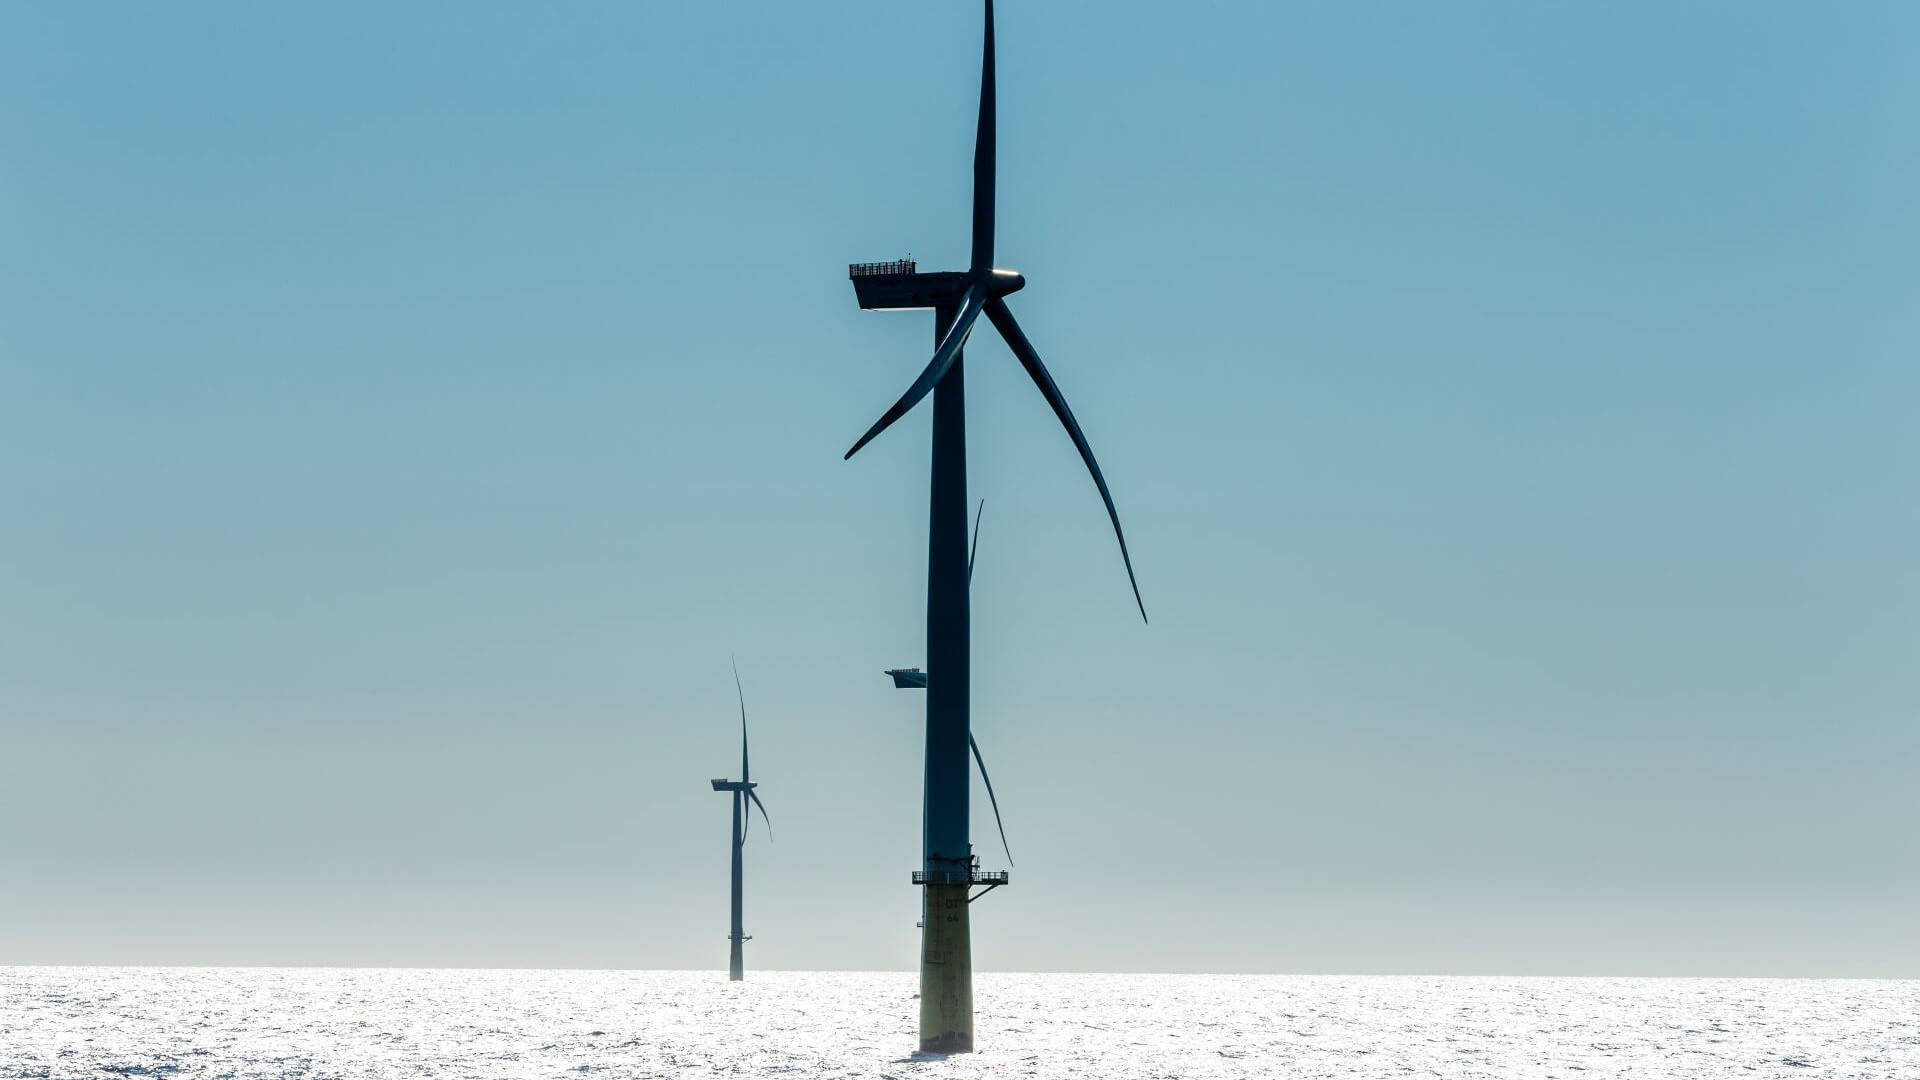 wind turbine at sea, with others in distance